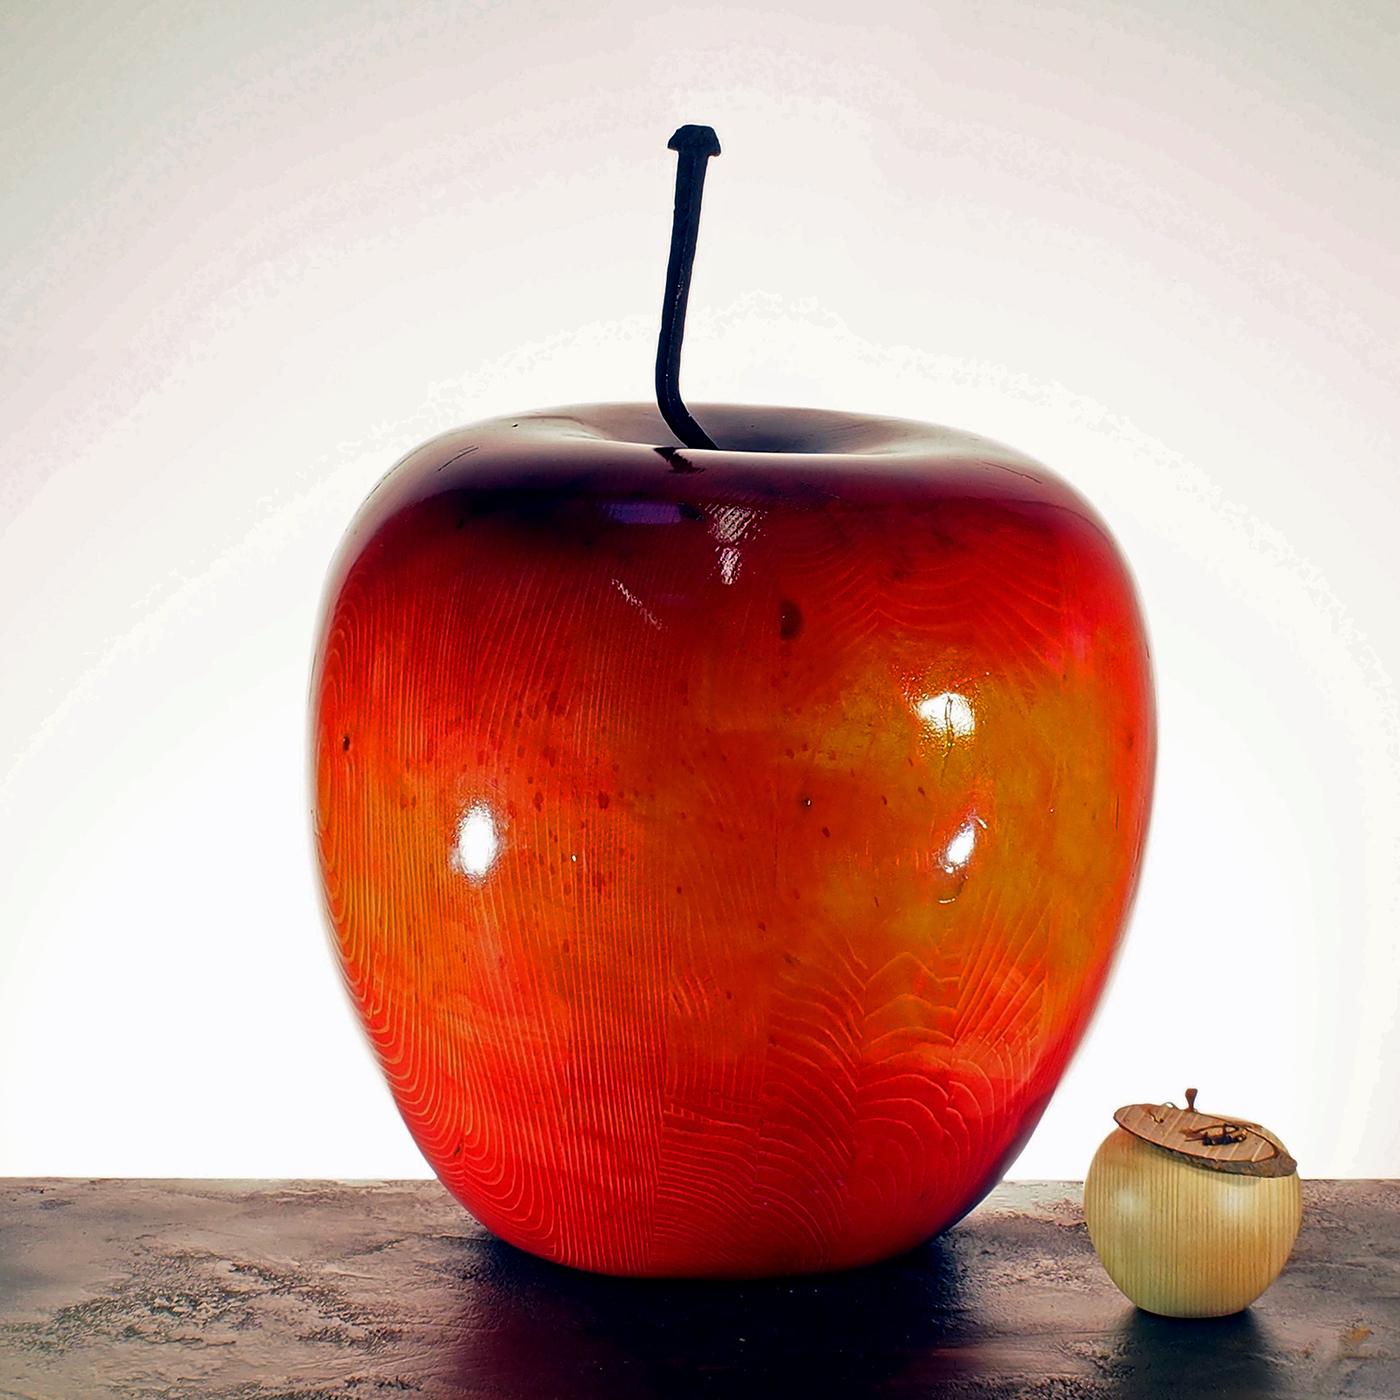 When looking at this shiny red apple sculpture, the mind instantly wanders to the story of Sleeping Beauty. This beautiful piece, hand-crafted by artisan Pietro Arnoldi, was carved with a chainsaw from solid fir wood and painted with multiple layers